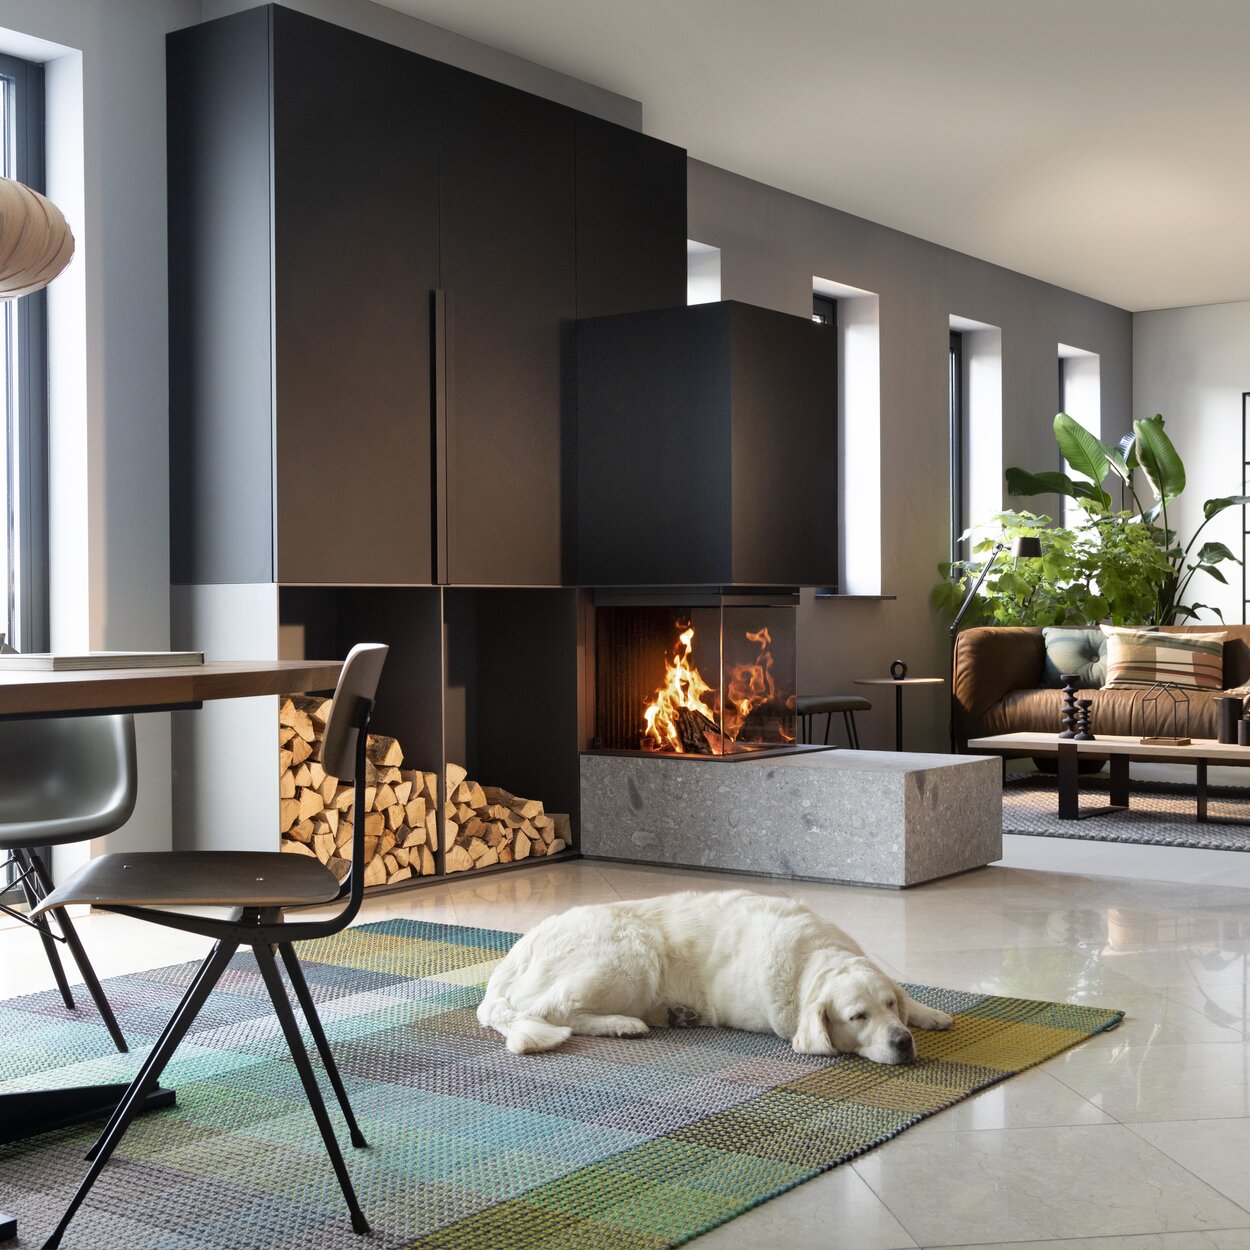 Wood fireplace W53/50R Room divider by Kalfire as a 3-sided fireplace that stylishly separates the living room from the dining room and a sleeping dog